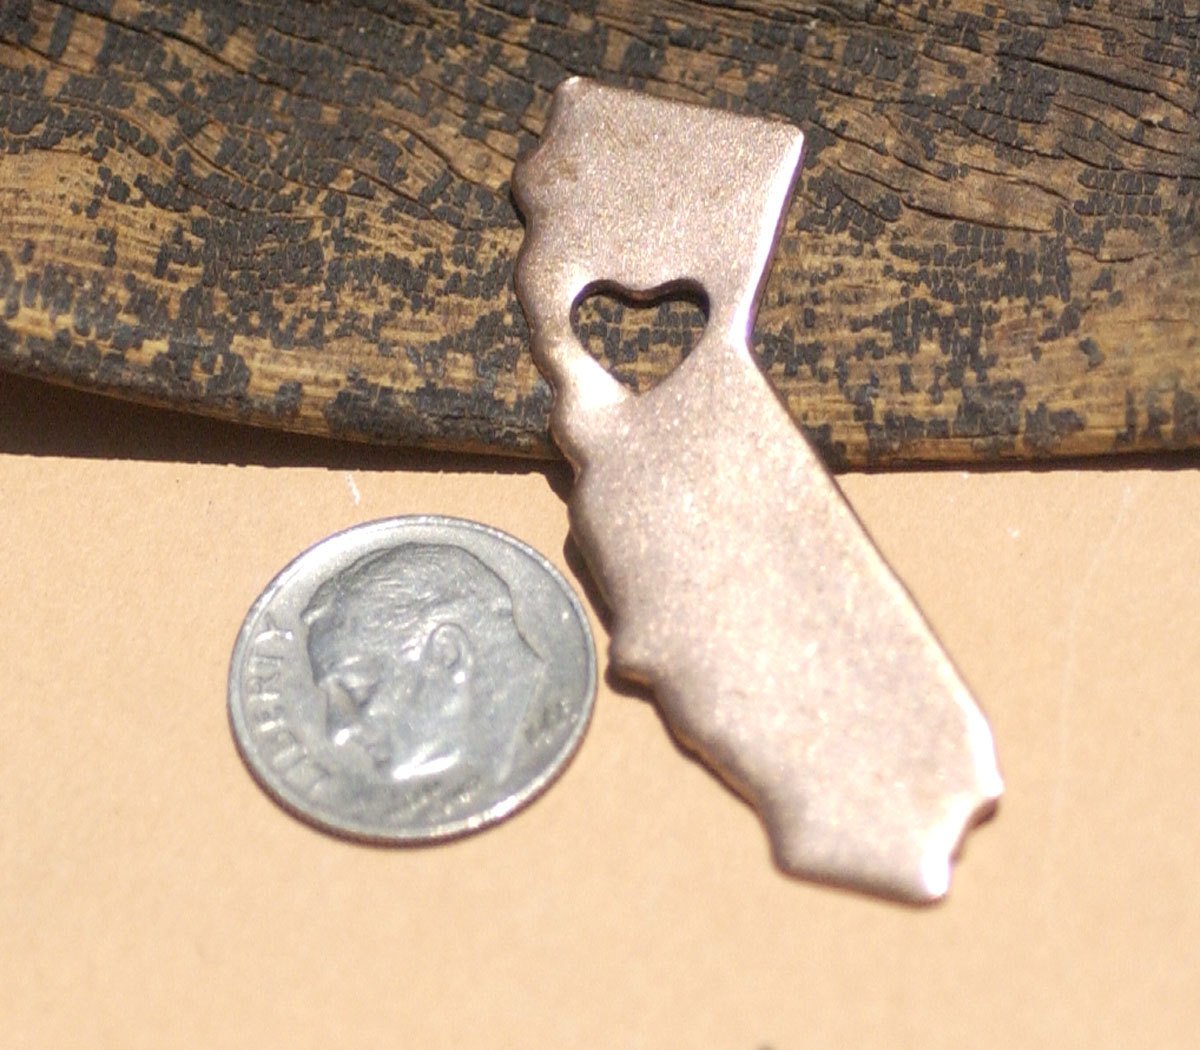 California State With Tiny Heart Chubby Blanks Cutout for Enameling Metalworking Stamping Texturing - Variety of Metals